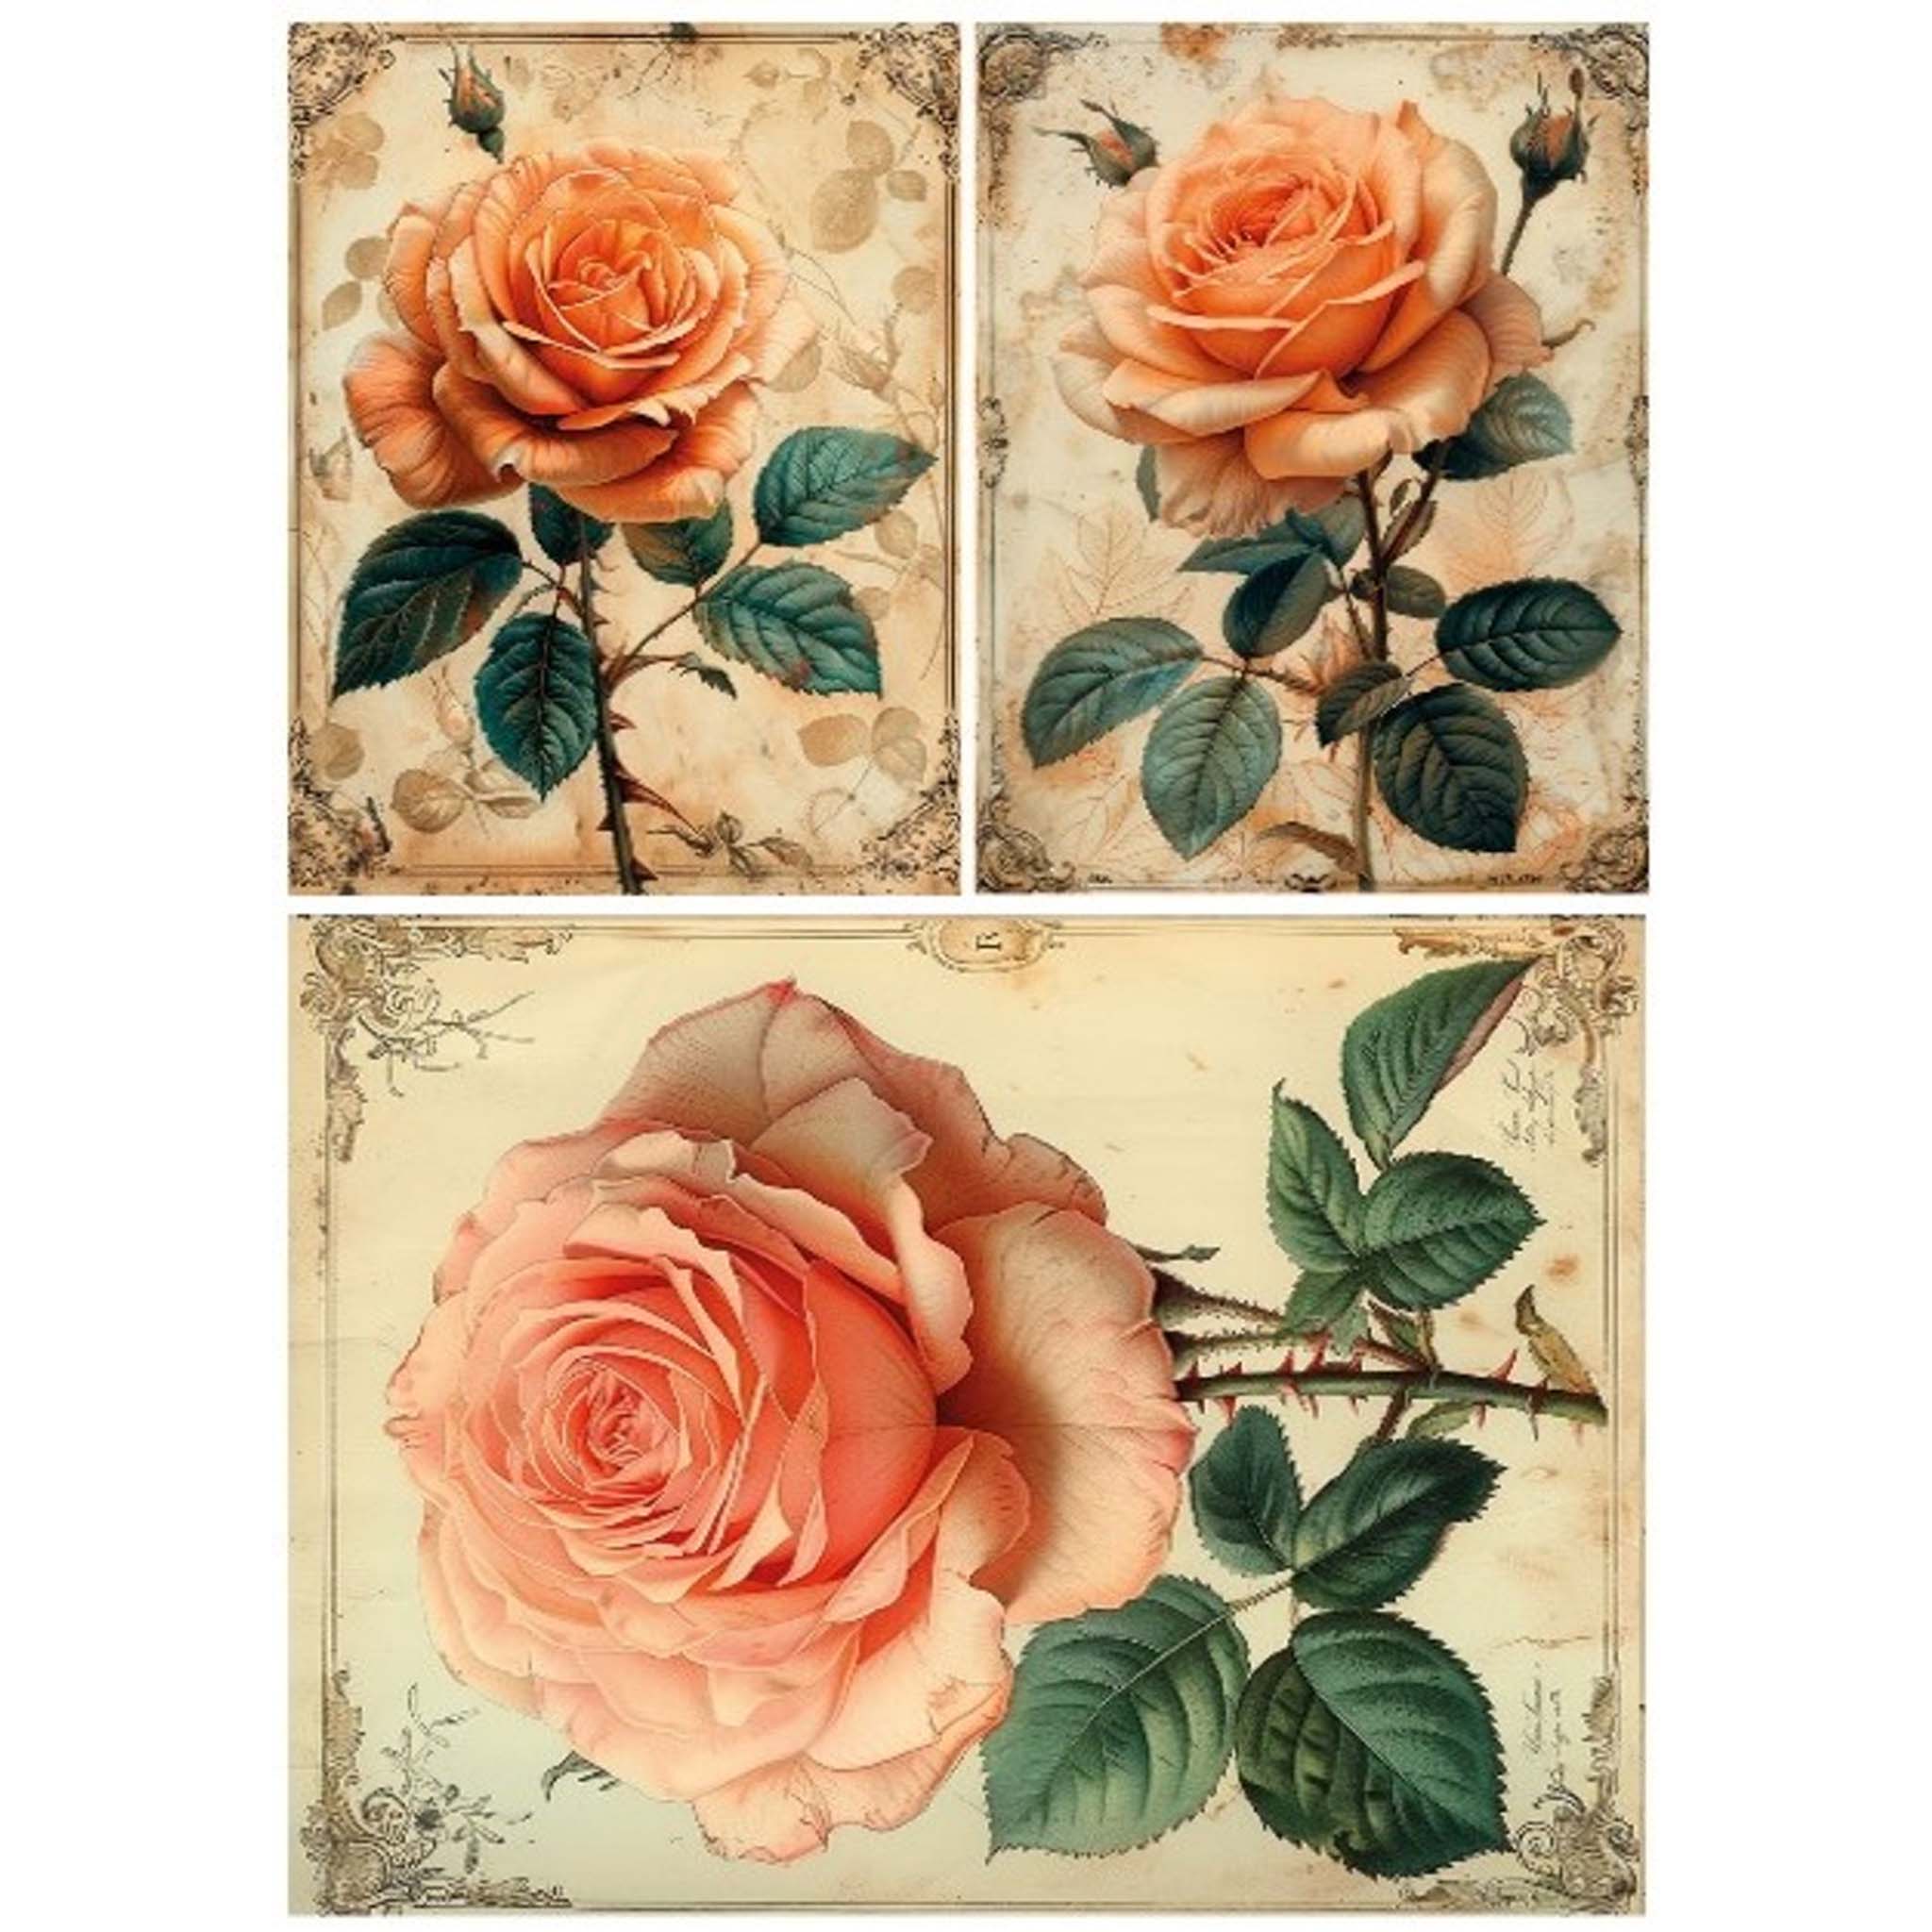 A4 rice paper that features 3 designs of large vintage single pink roses on stems against a white background. 